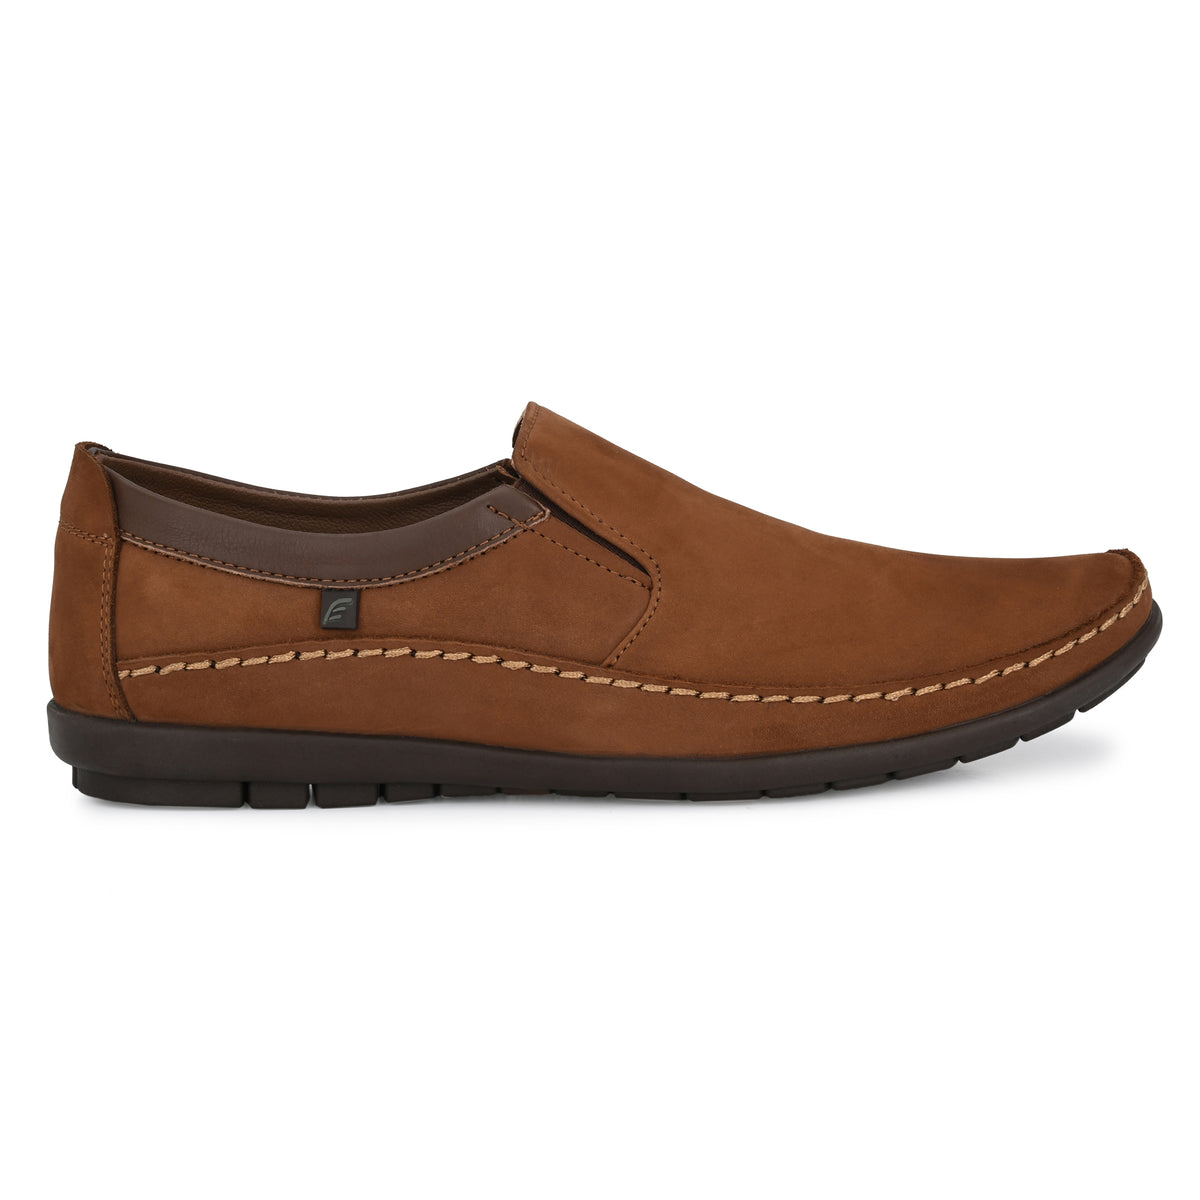 Shop Leather Casual Slip On Shoes For Men – Egoss Shoes